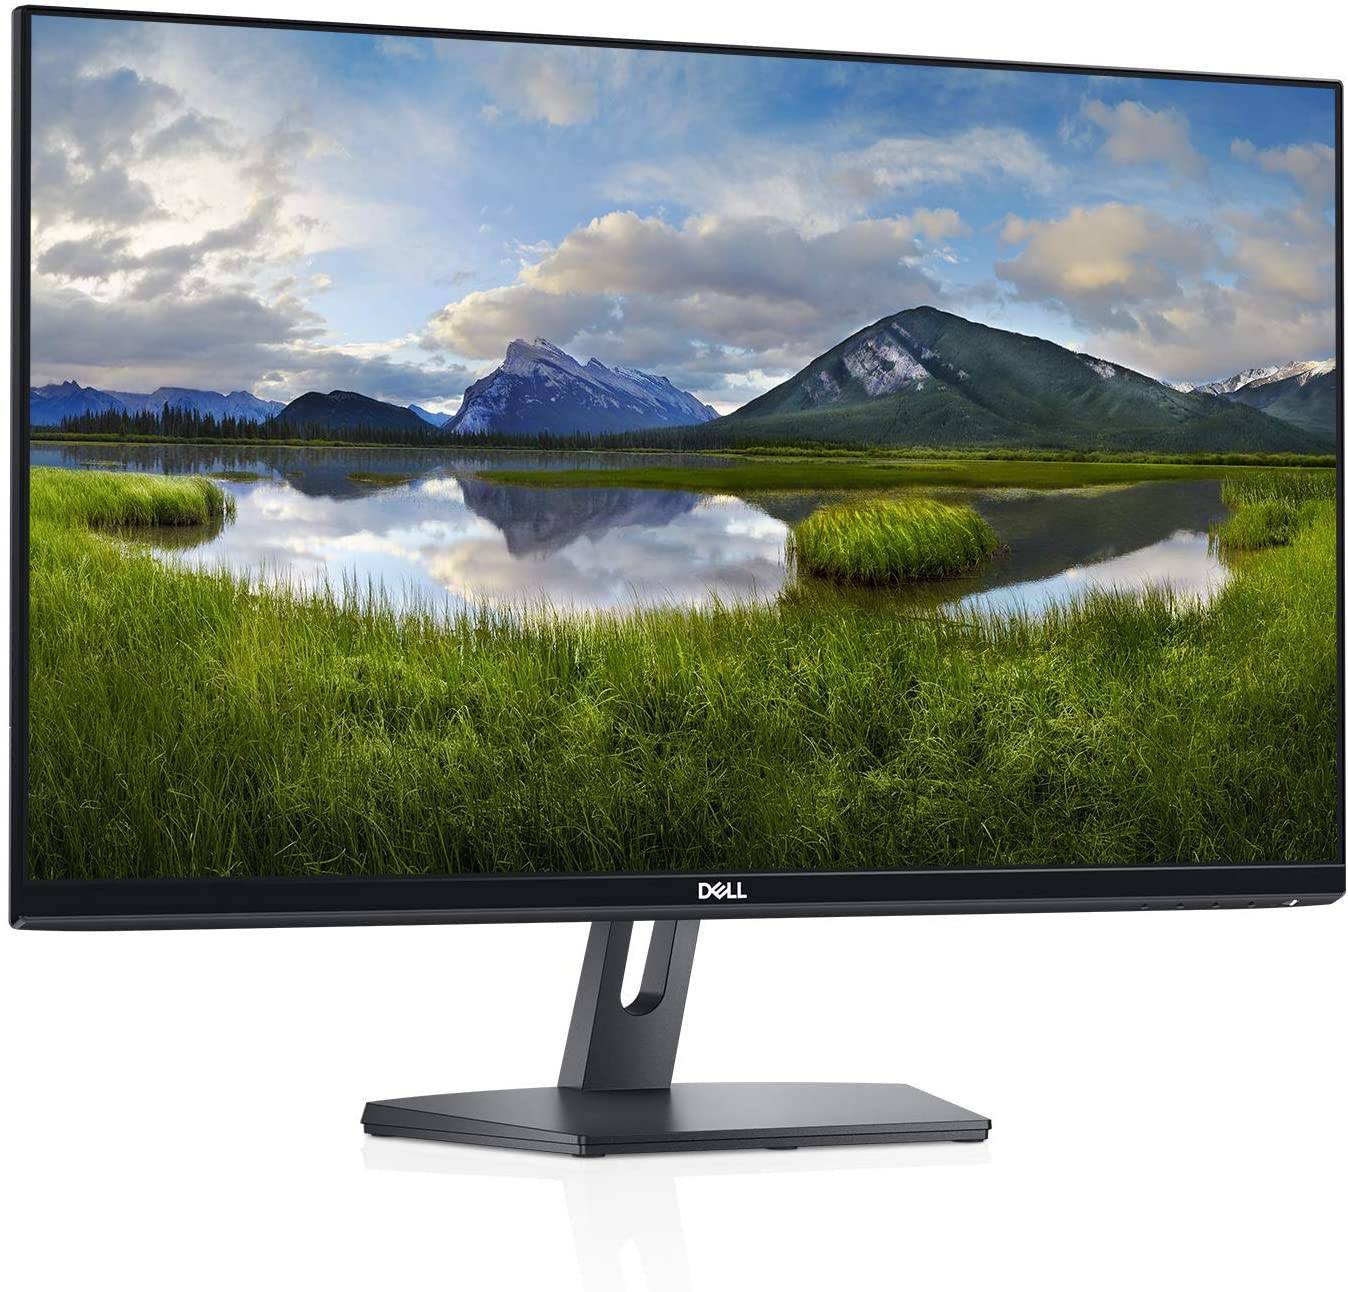 7.Dell SE2719HS-Best monitor for office work